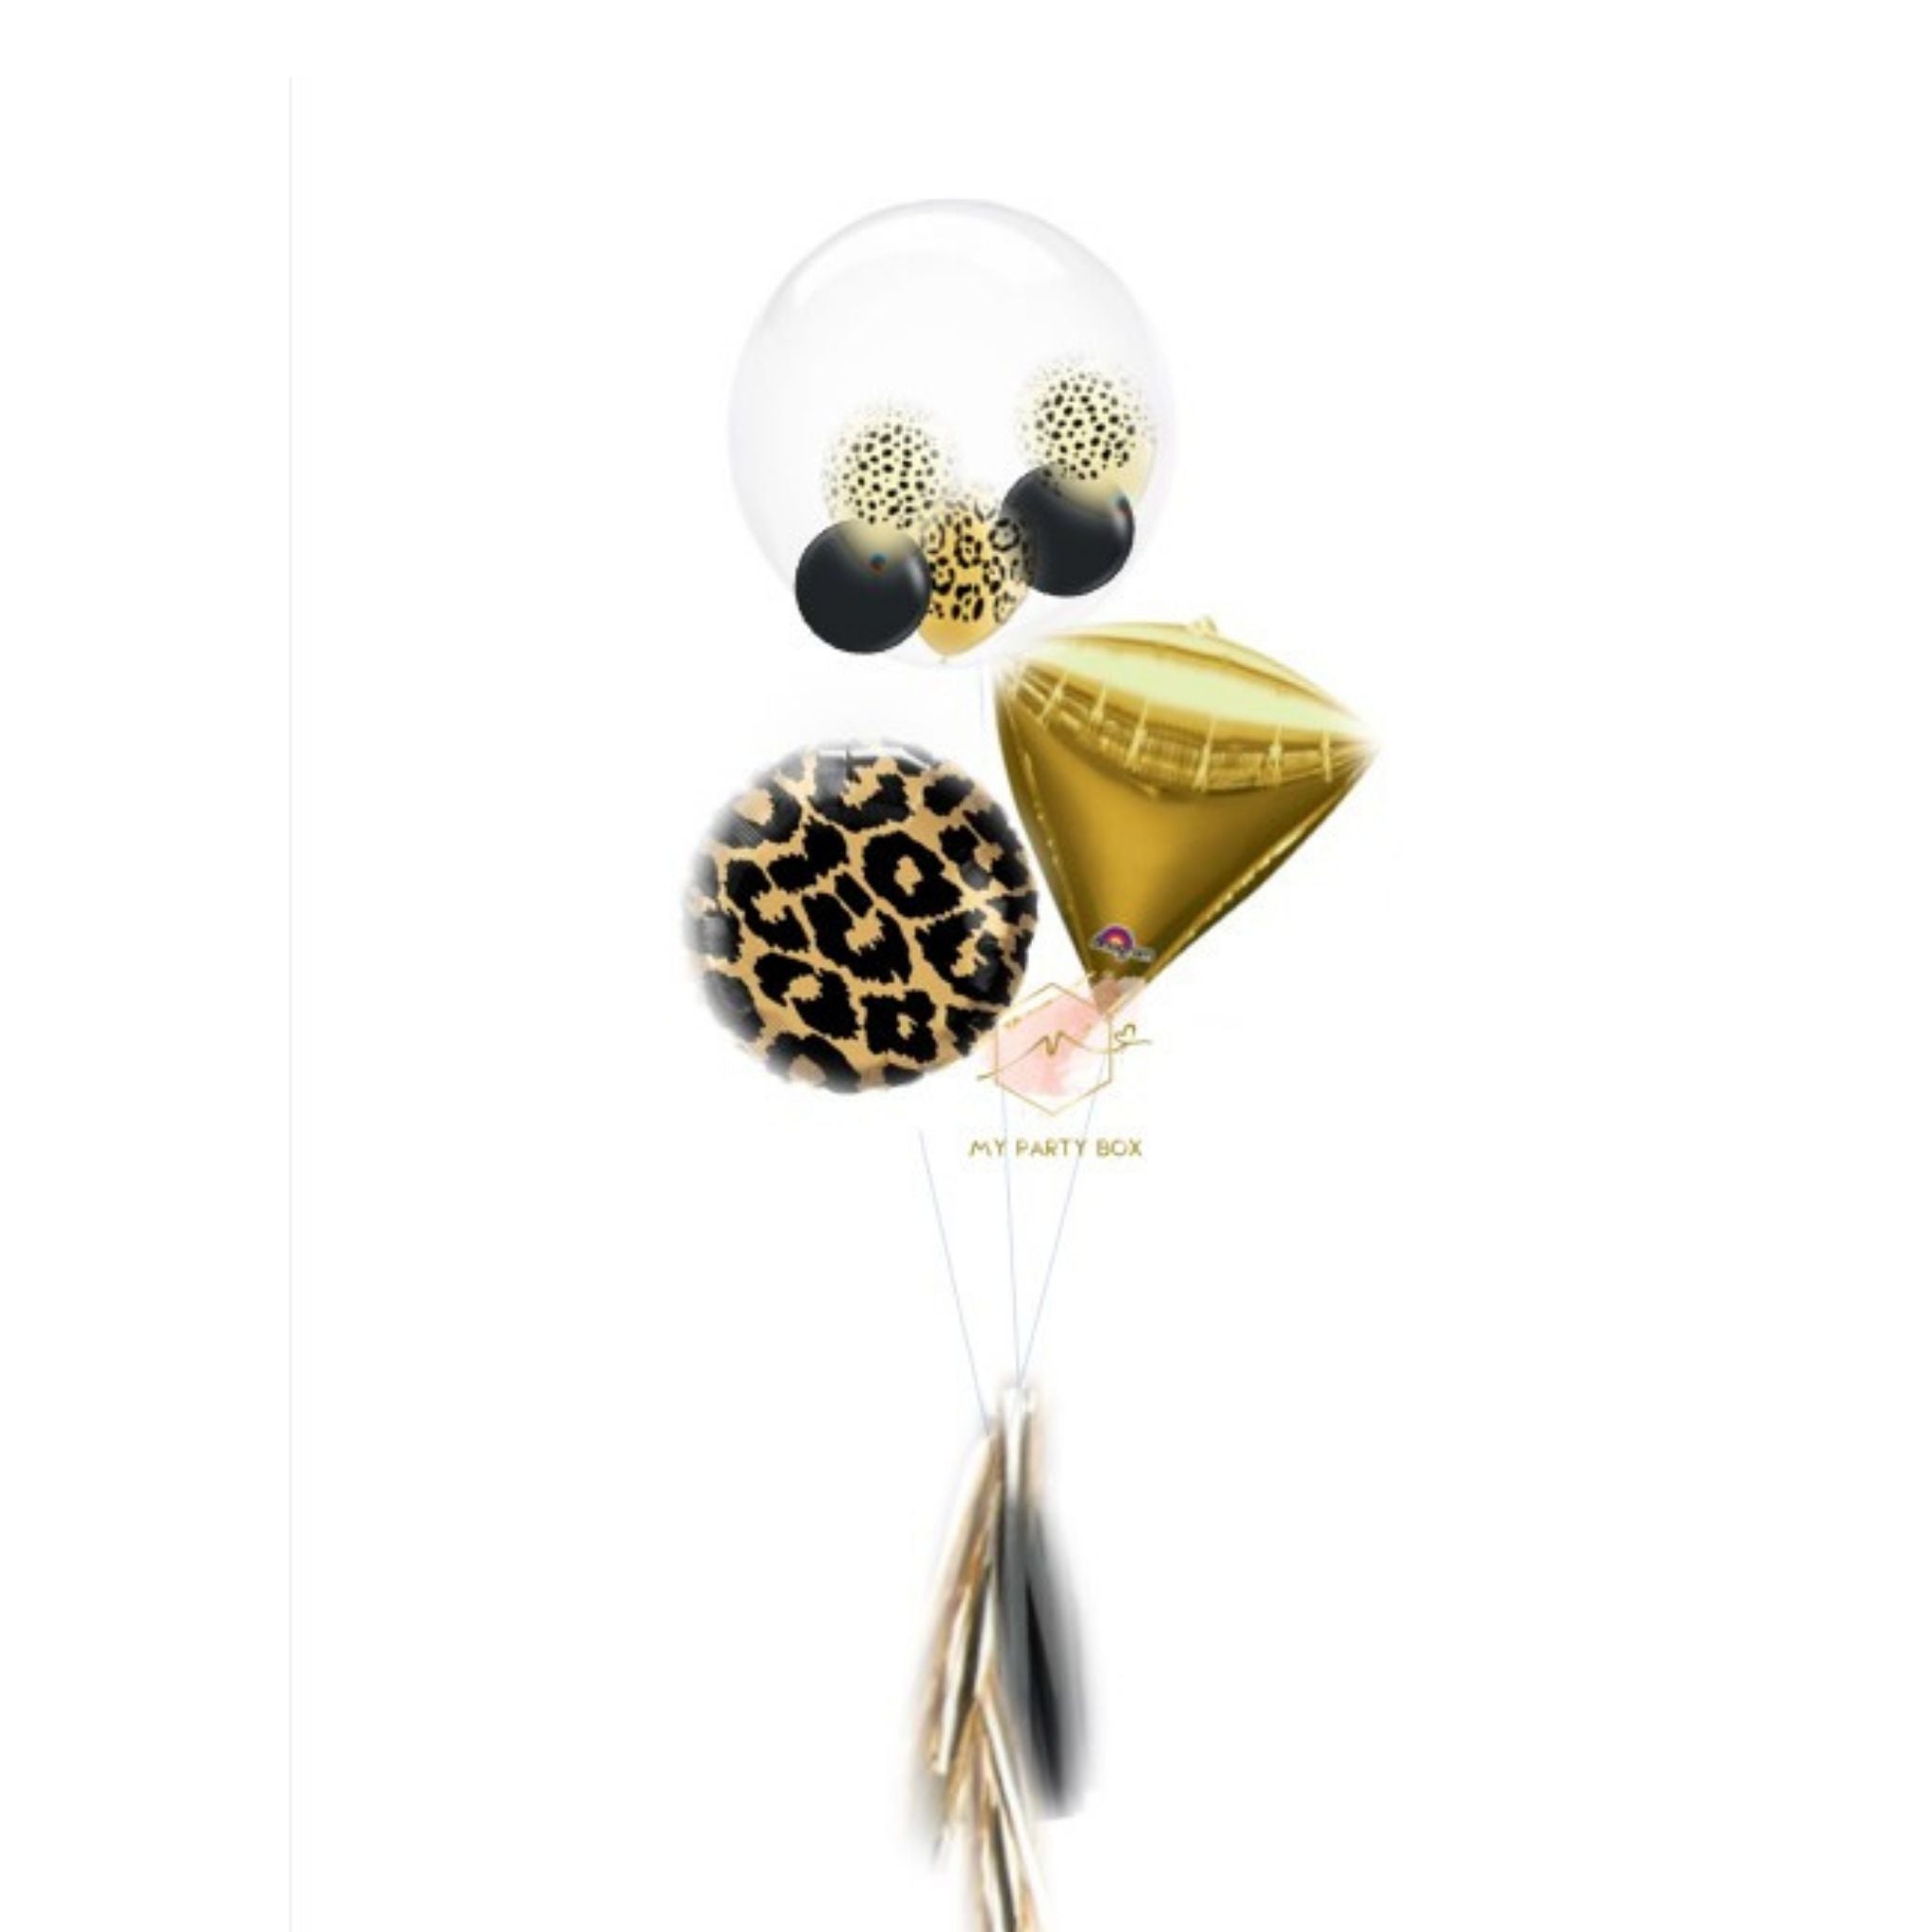 My Party Box Leopard Bubble Gum Balloon Bouquet with clear bubble balloons with mini animal print balloons inside and one foil leopard balloon and one gold diamond foil balloon.